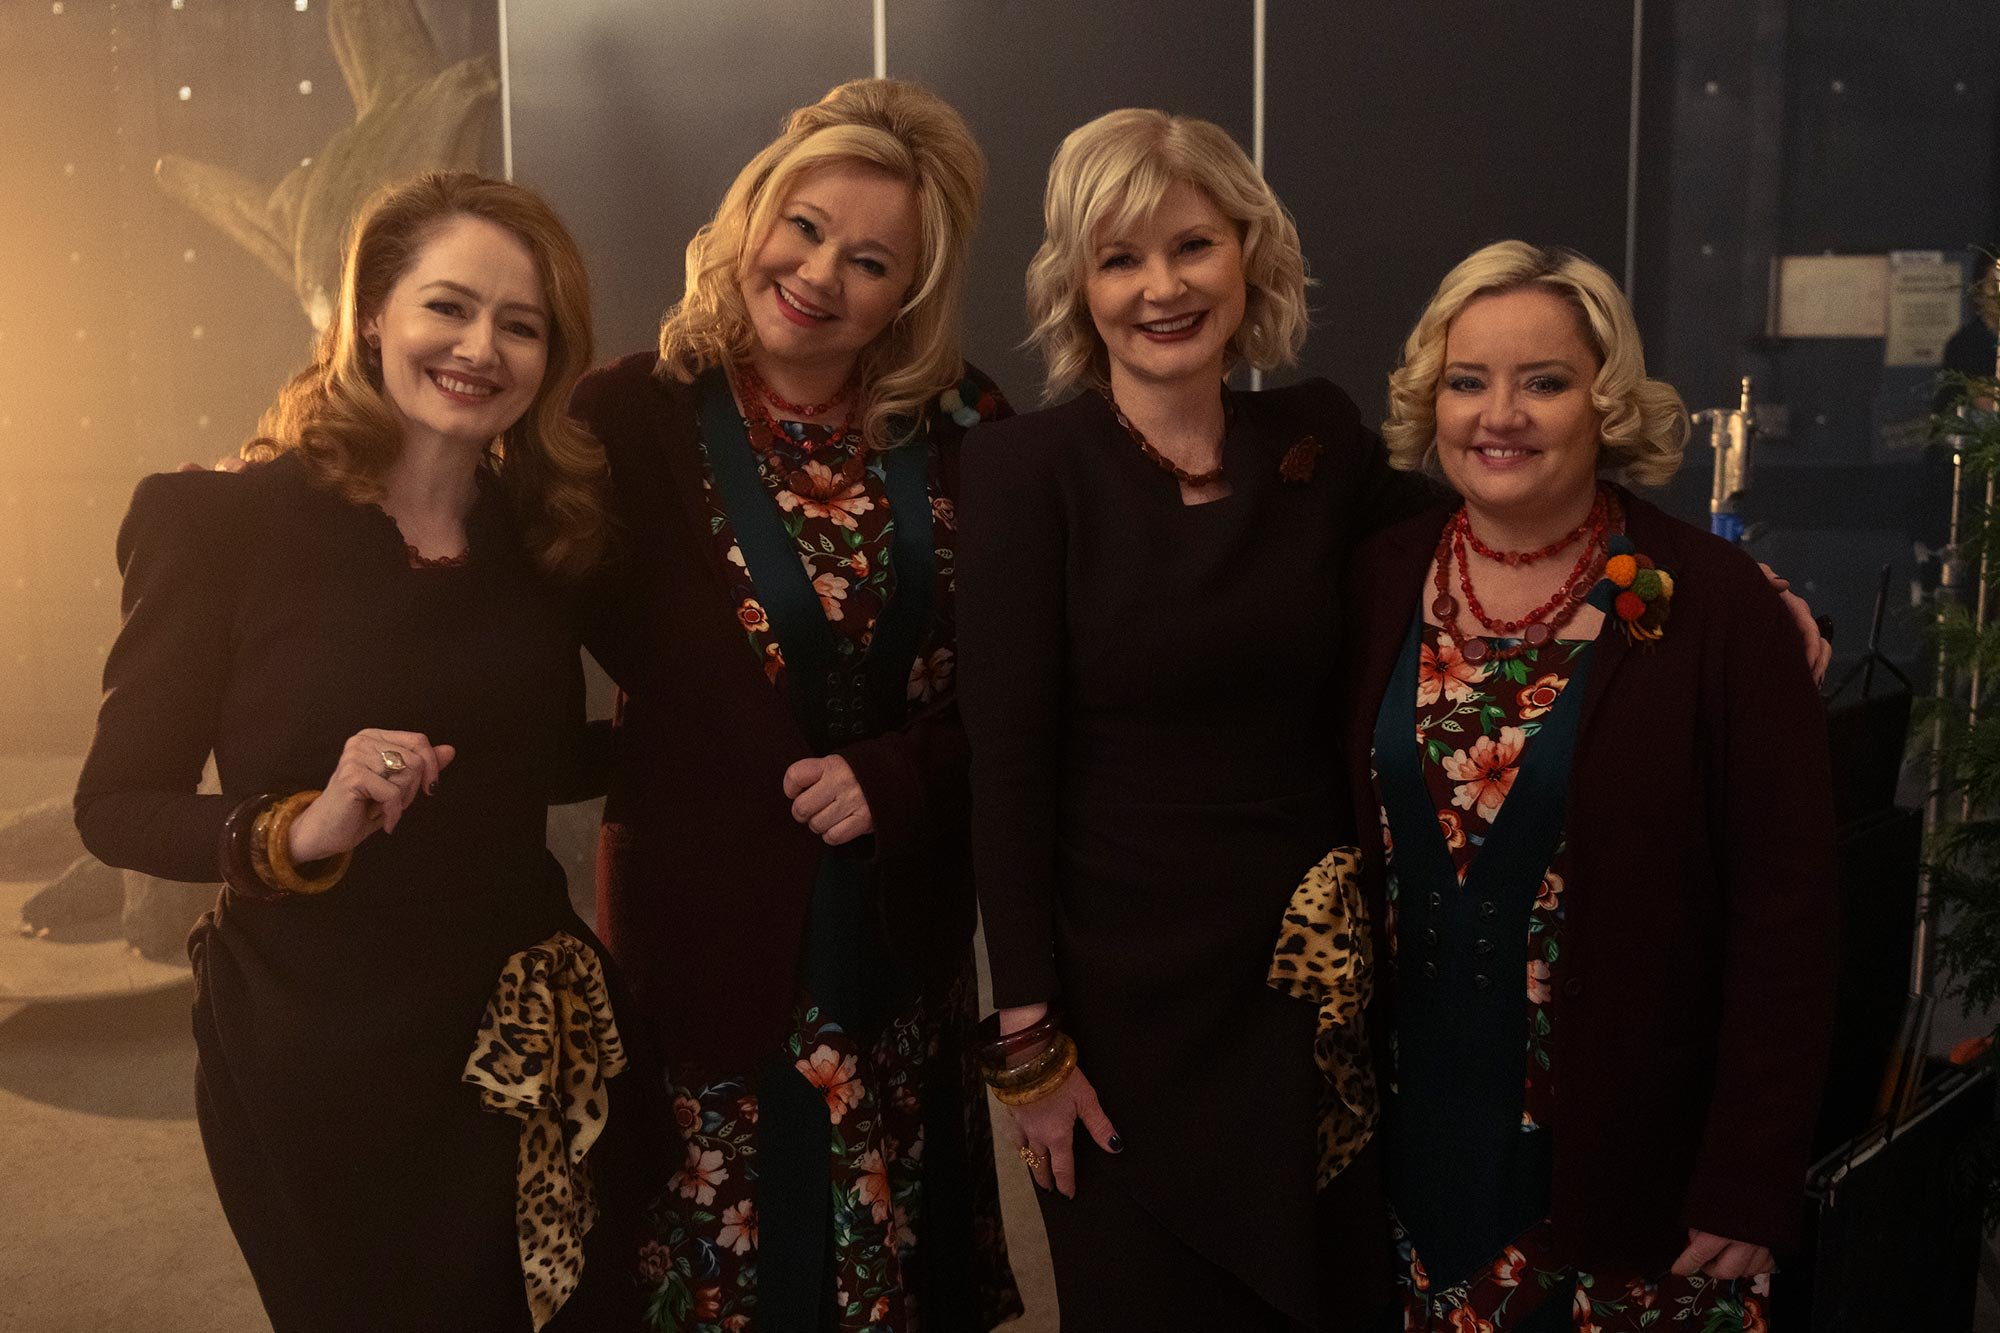 Sabrina the Teenage Witch aunts meet the Chilling Adventures of Sabrina aunts